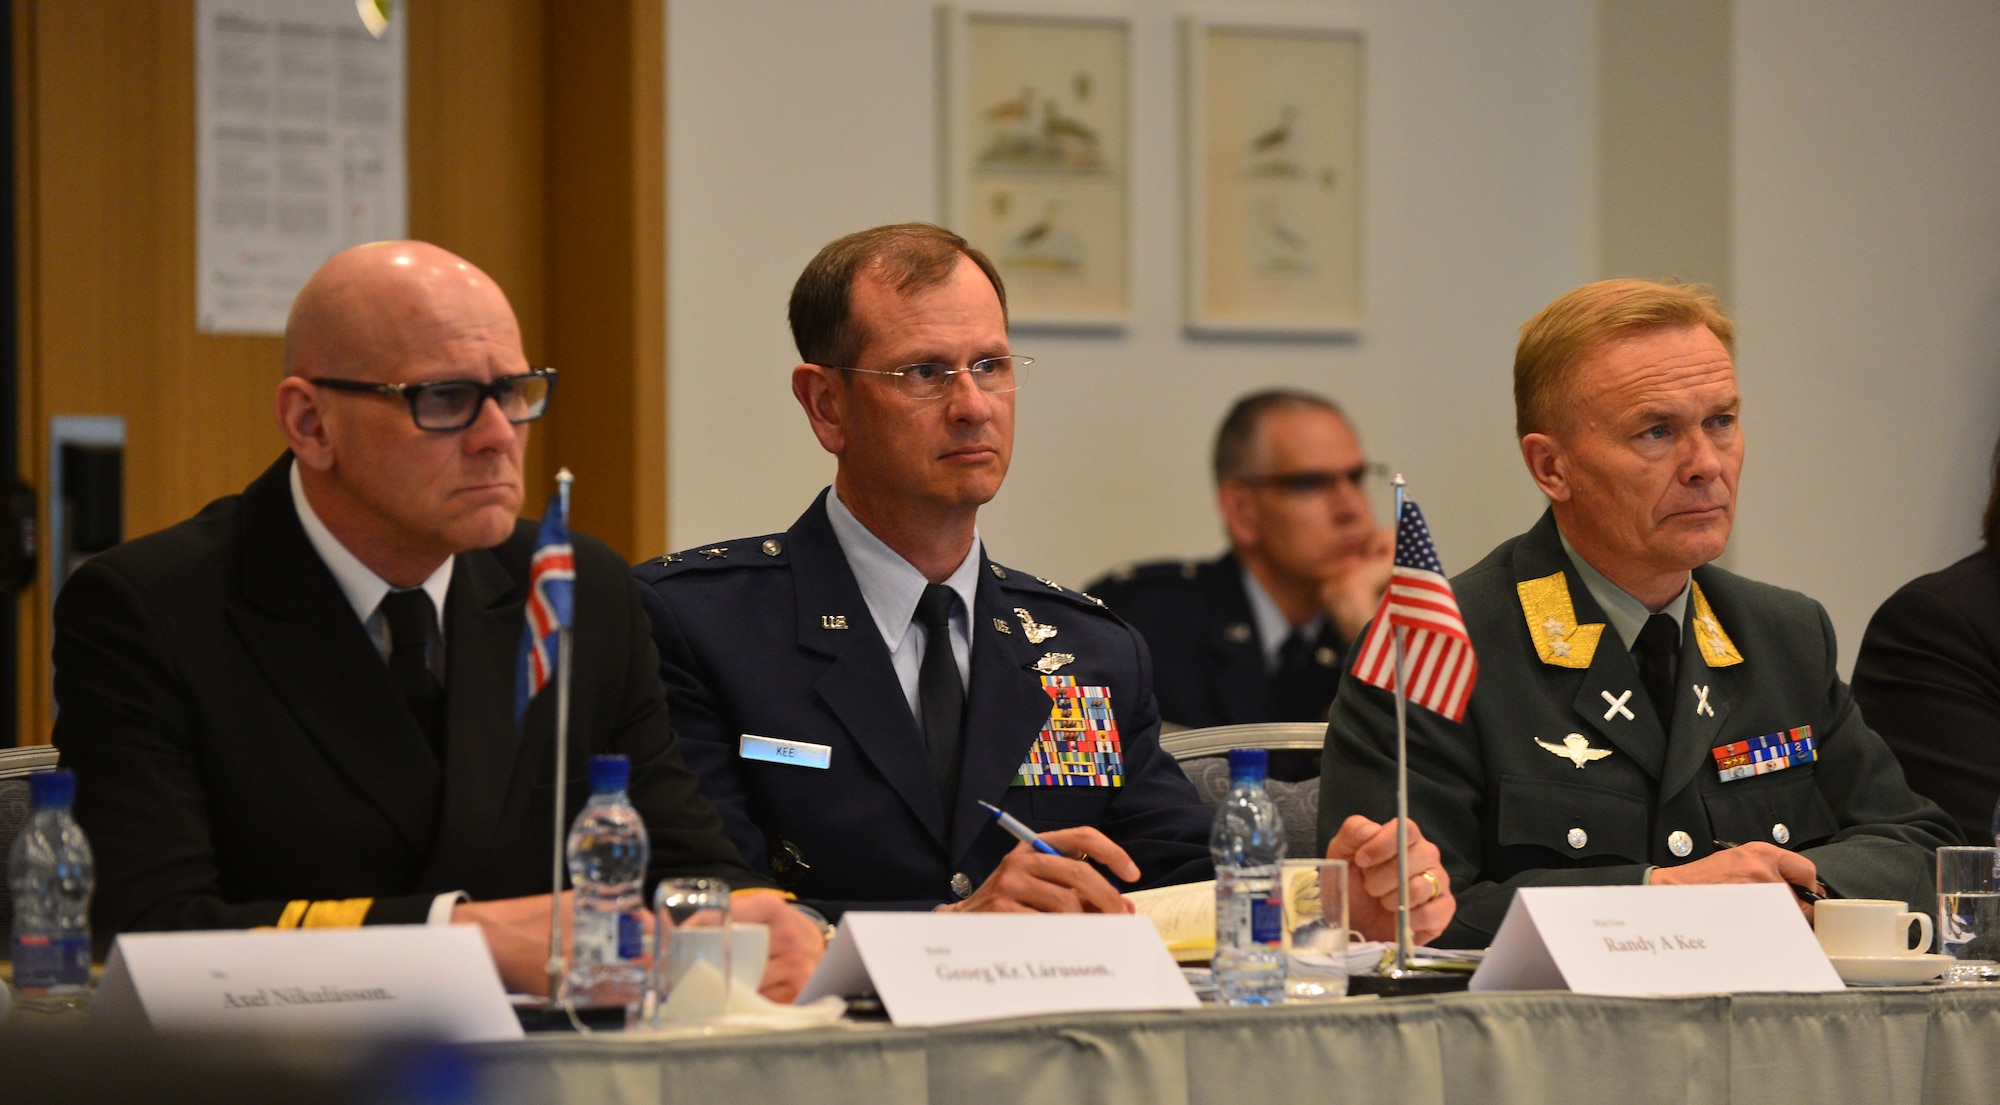 Icelandic Coast Guard Rear Admiral Georg Lárusson, U.S. Air Force Maj. Gen. Randy Kee and Norwegian Army Maj. Gen. Odin Johannessen listen to a presentation during the Arctic Security Forces Roundtable, May 12, 2015 in Reykjavik, Iceland. Kee and Johannessen co-led the conference, while Lárusson led coordination of host nation support. Representatives from 11 nations across Europe and North America met for the ASFR in order to promote regional understanding and enhance multilateral security operations within the Arctic area. (U.S. Air Force photo by 2nd Lt. Meredith Mulvihill/Released)